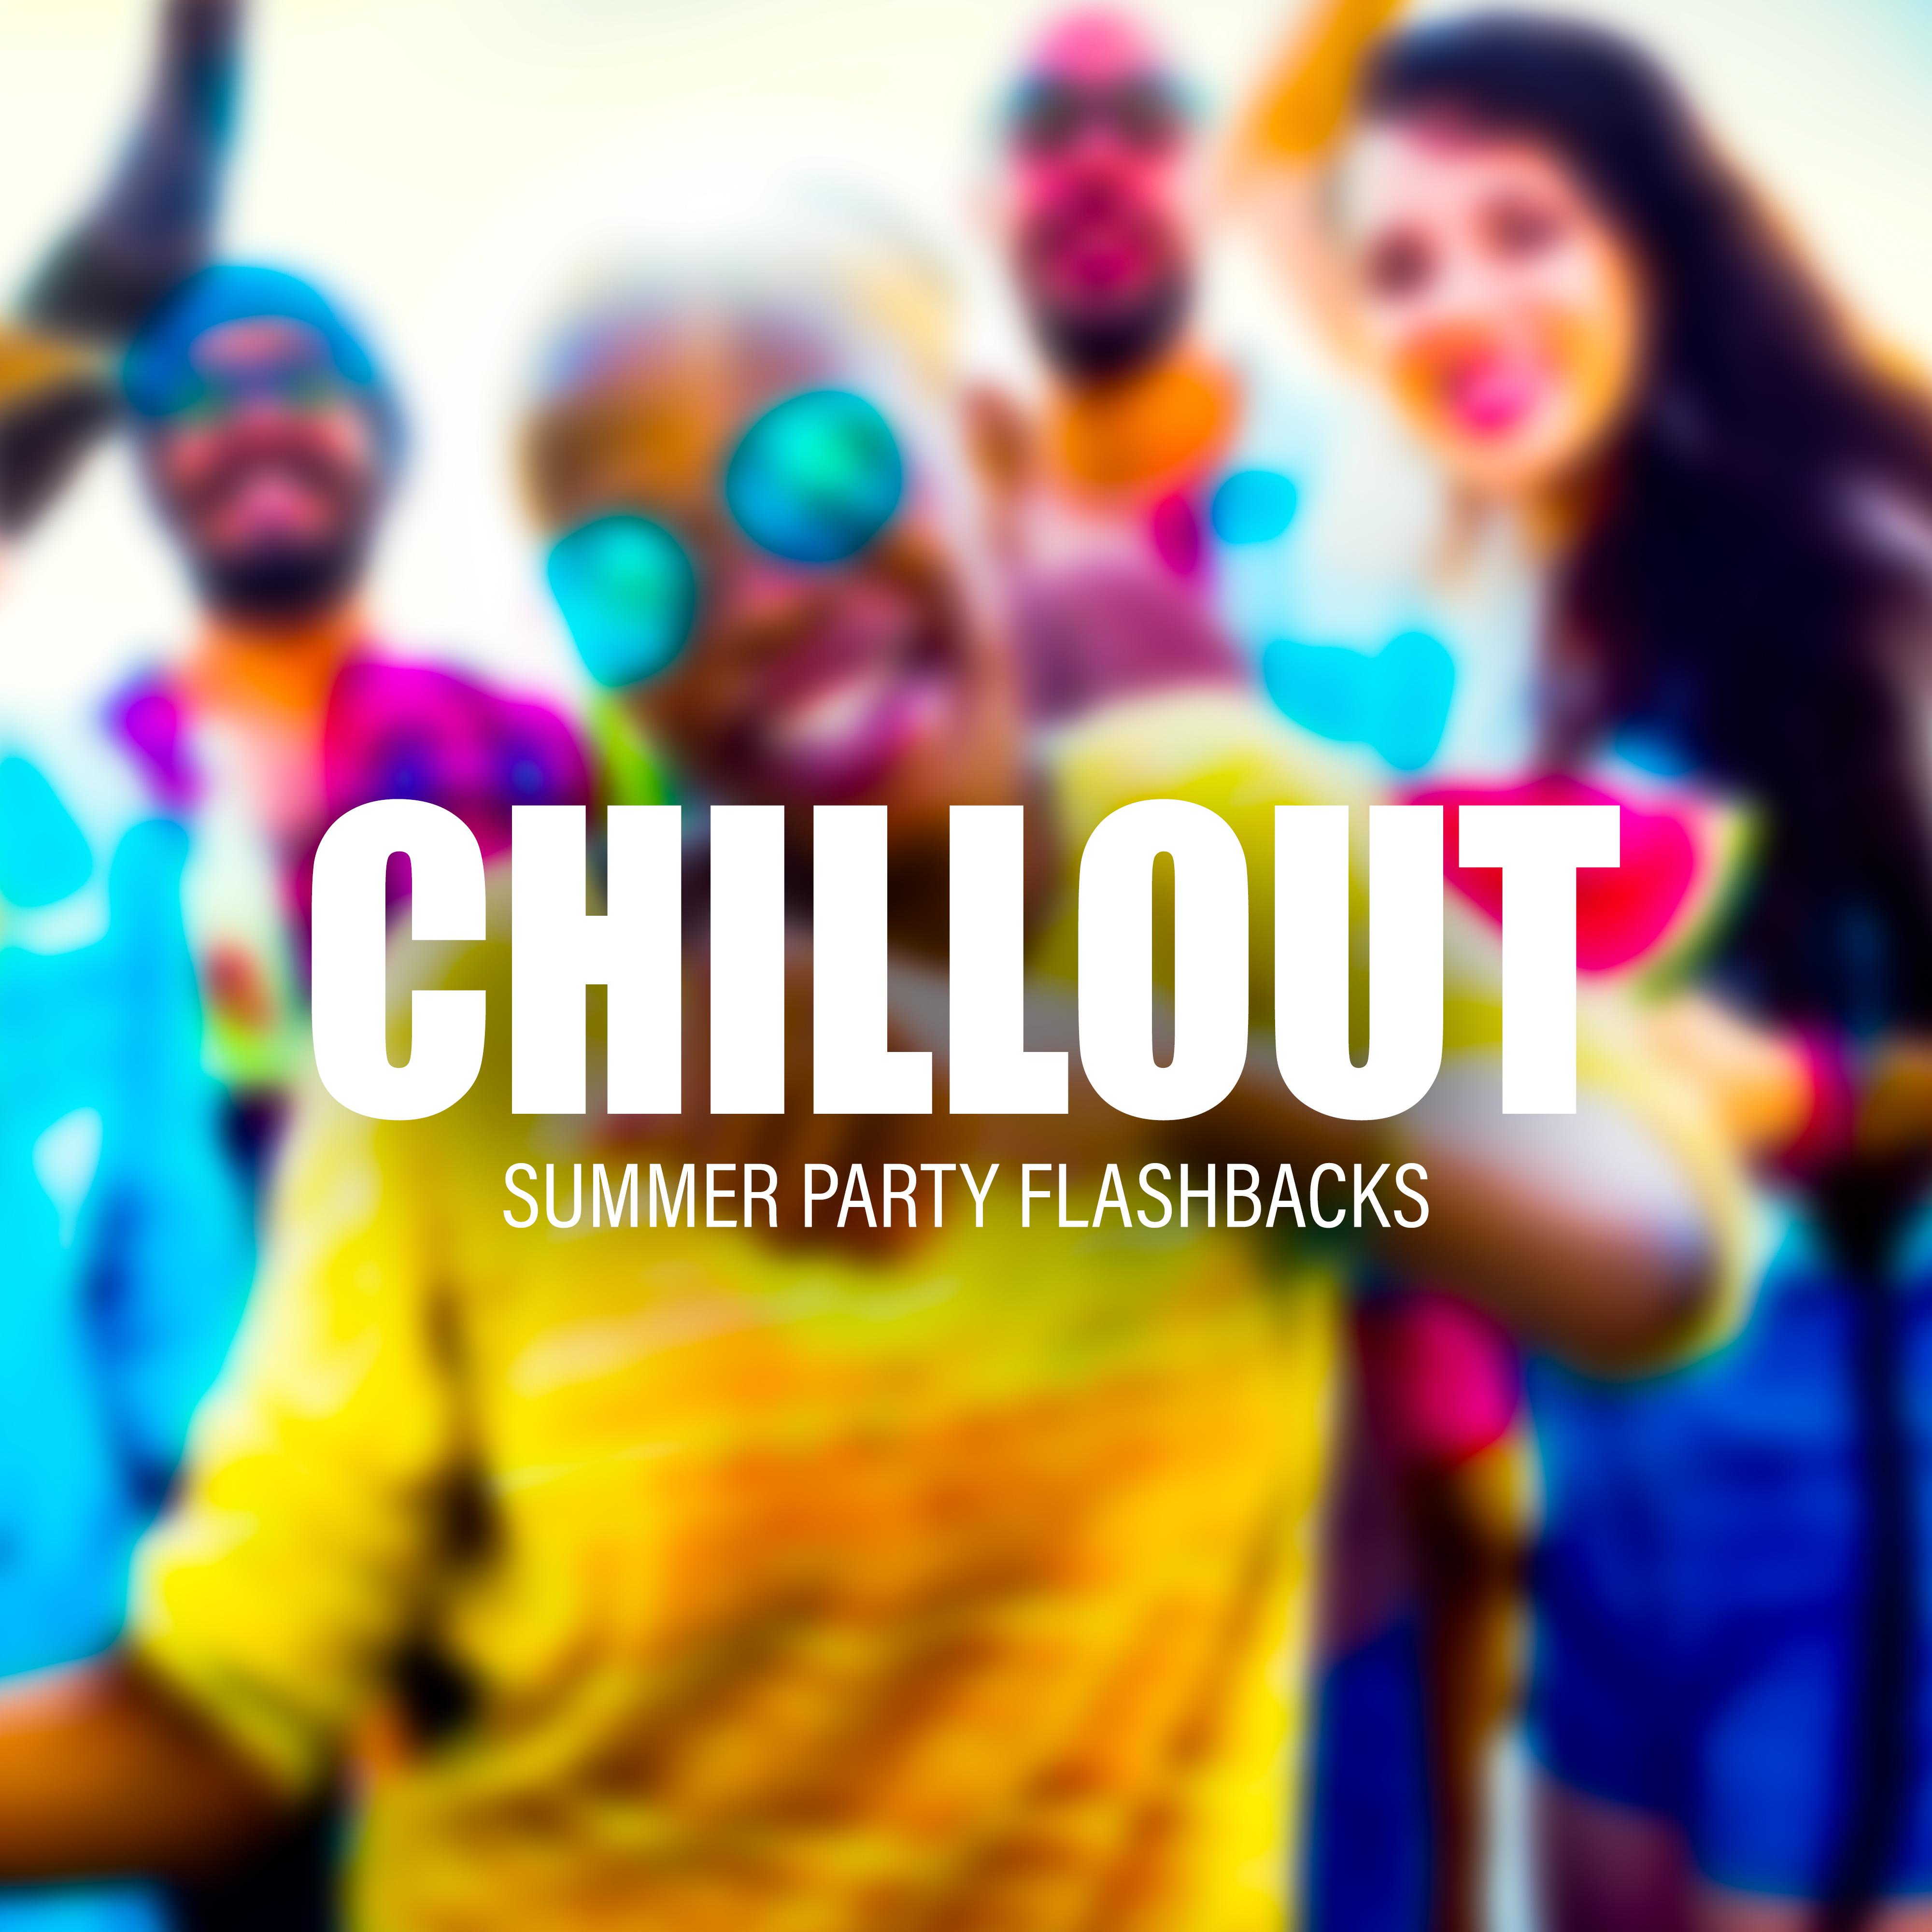 Chillout Summer Party Flashbacks: 15 Chill Electronic Tracks Compilation for Beach Bar DJ's